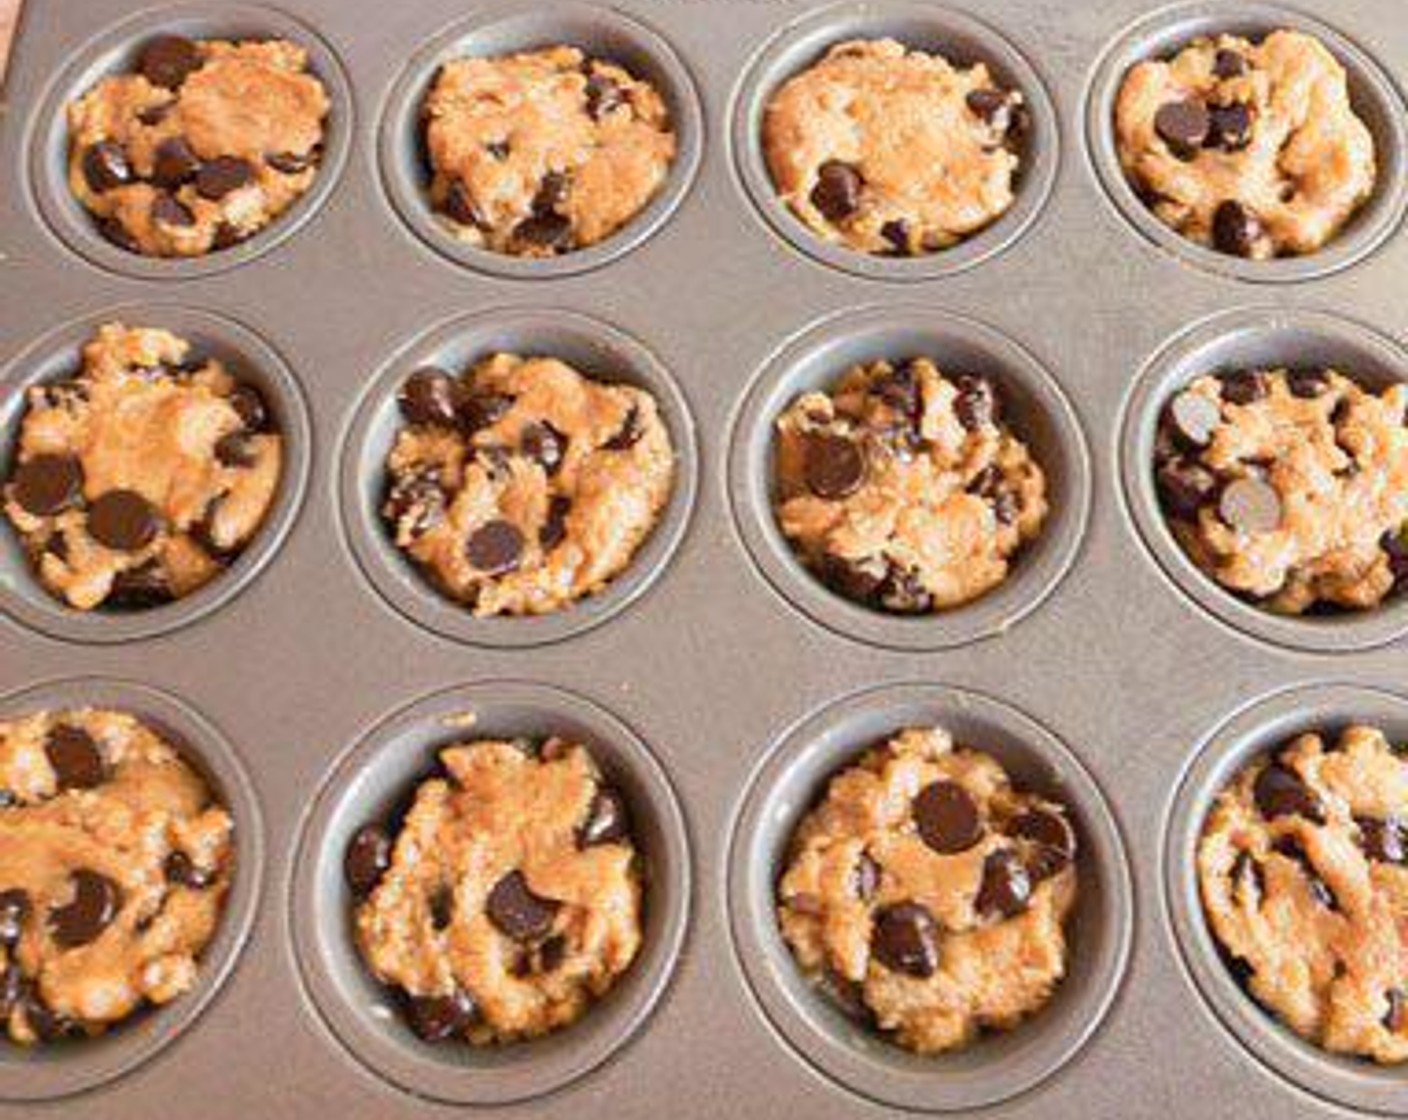 step 4 Grease a 24 count mini muffin tin with canola spray or portion out 24 cookies for suggested skinny serving size.